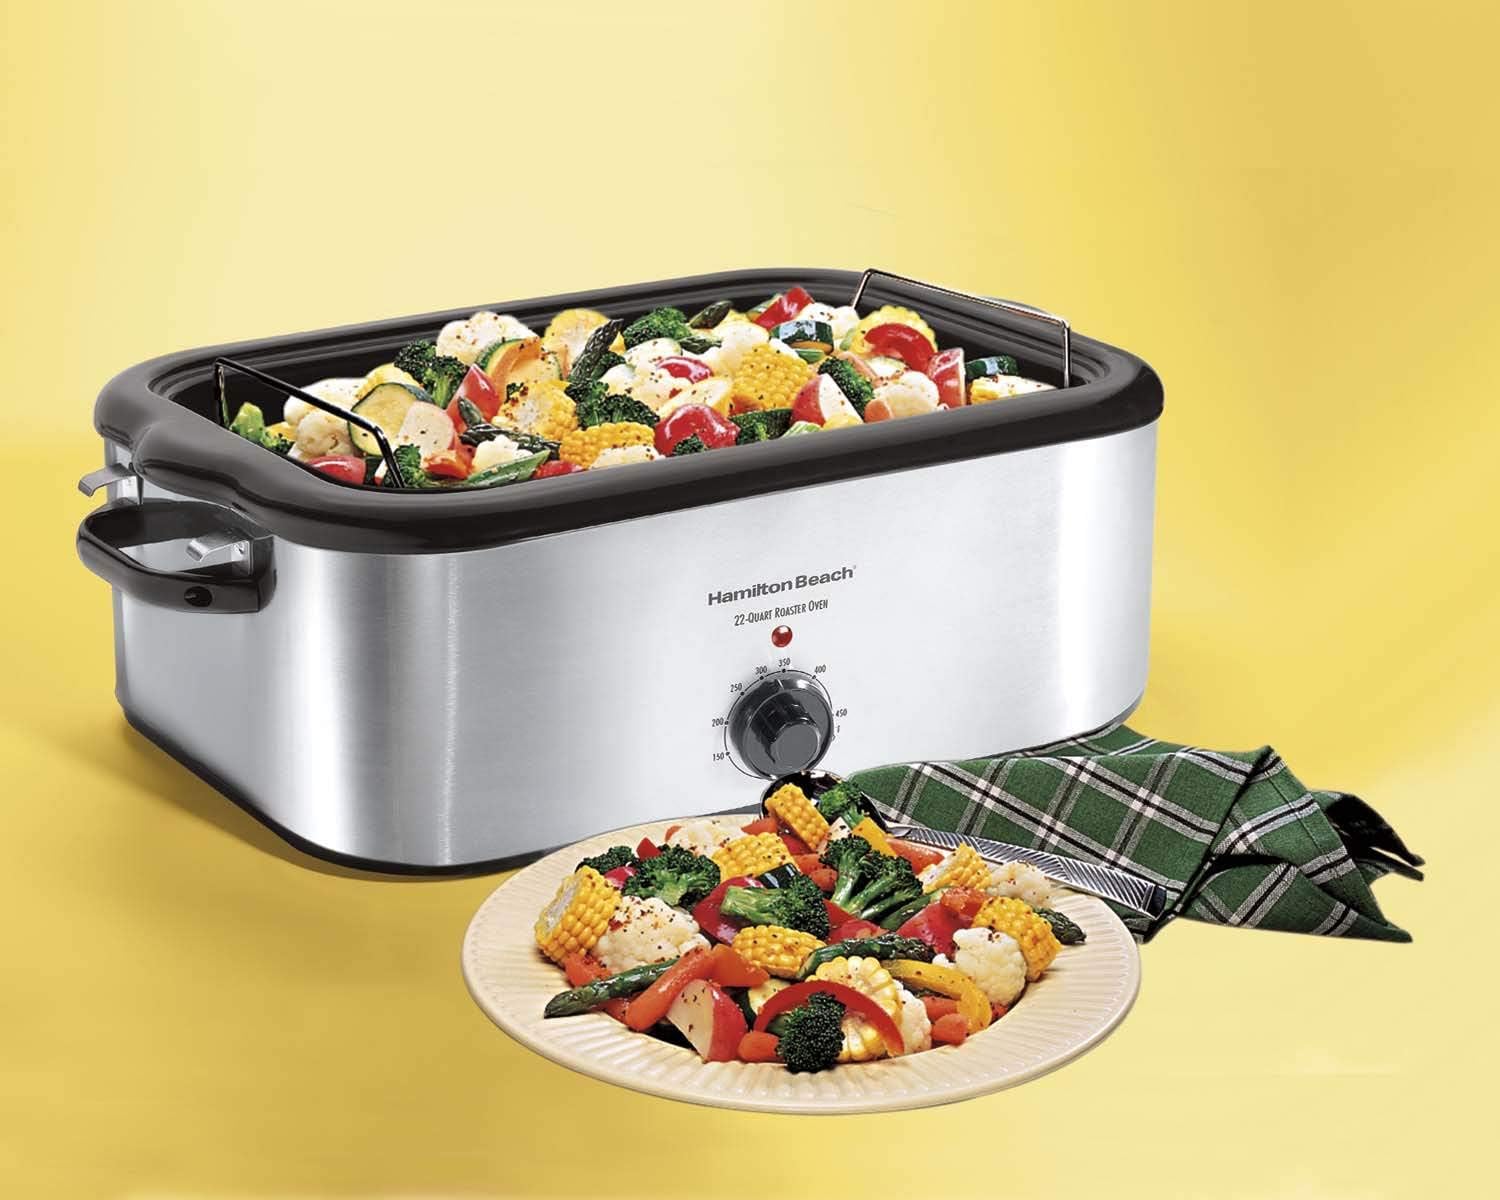 Hamilton Beach 32229 22-Quart Roaster Oven, Stainless Steel (Discontinued)